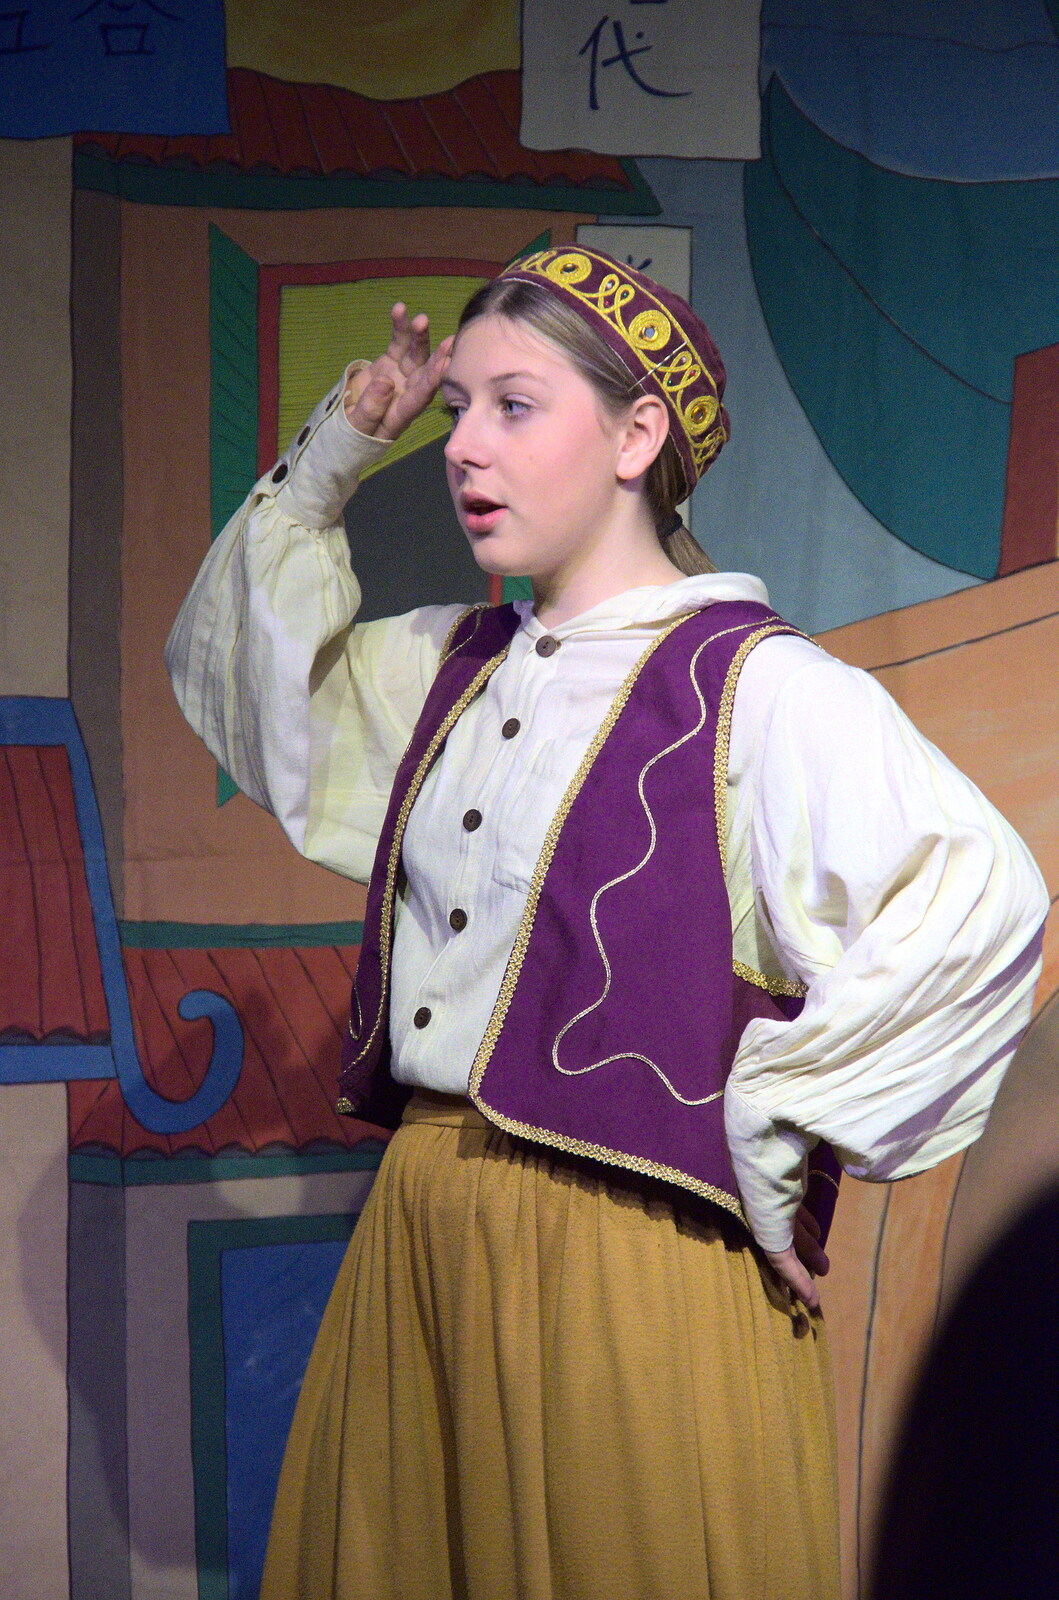 Soph the Roph is Aladdin from Dove Players do Aladdin, Eye, Suffolk - 10th December 2022